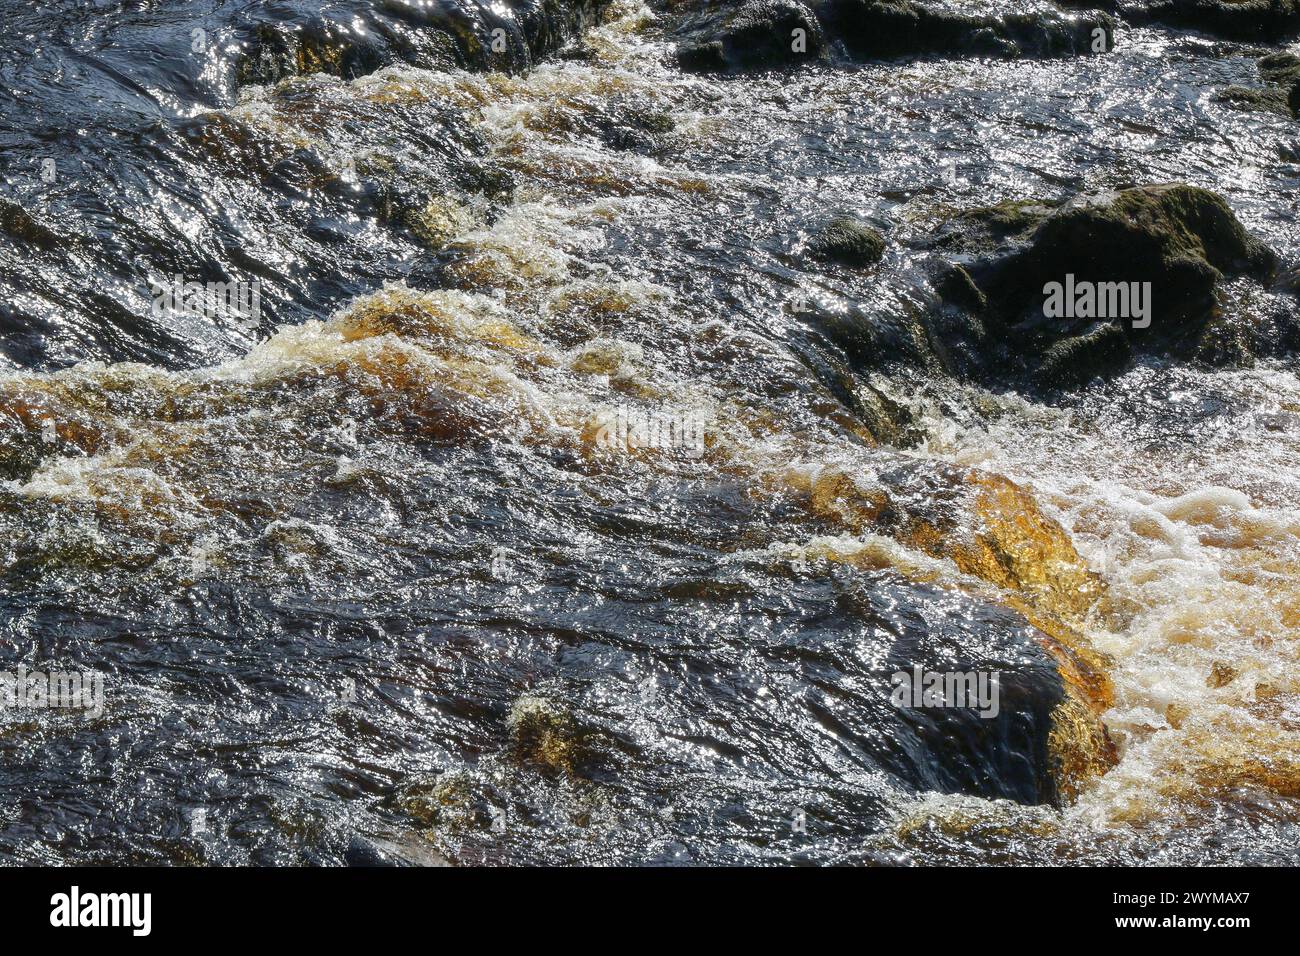 Peat colour spate river Donegal Ireland in early autumn - Glen River sout-west Donegal. Stock Photo